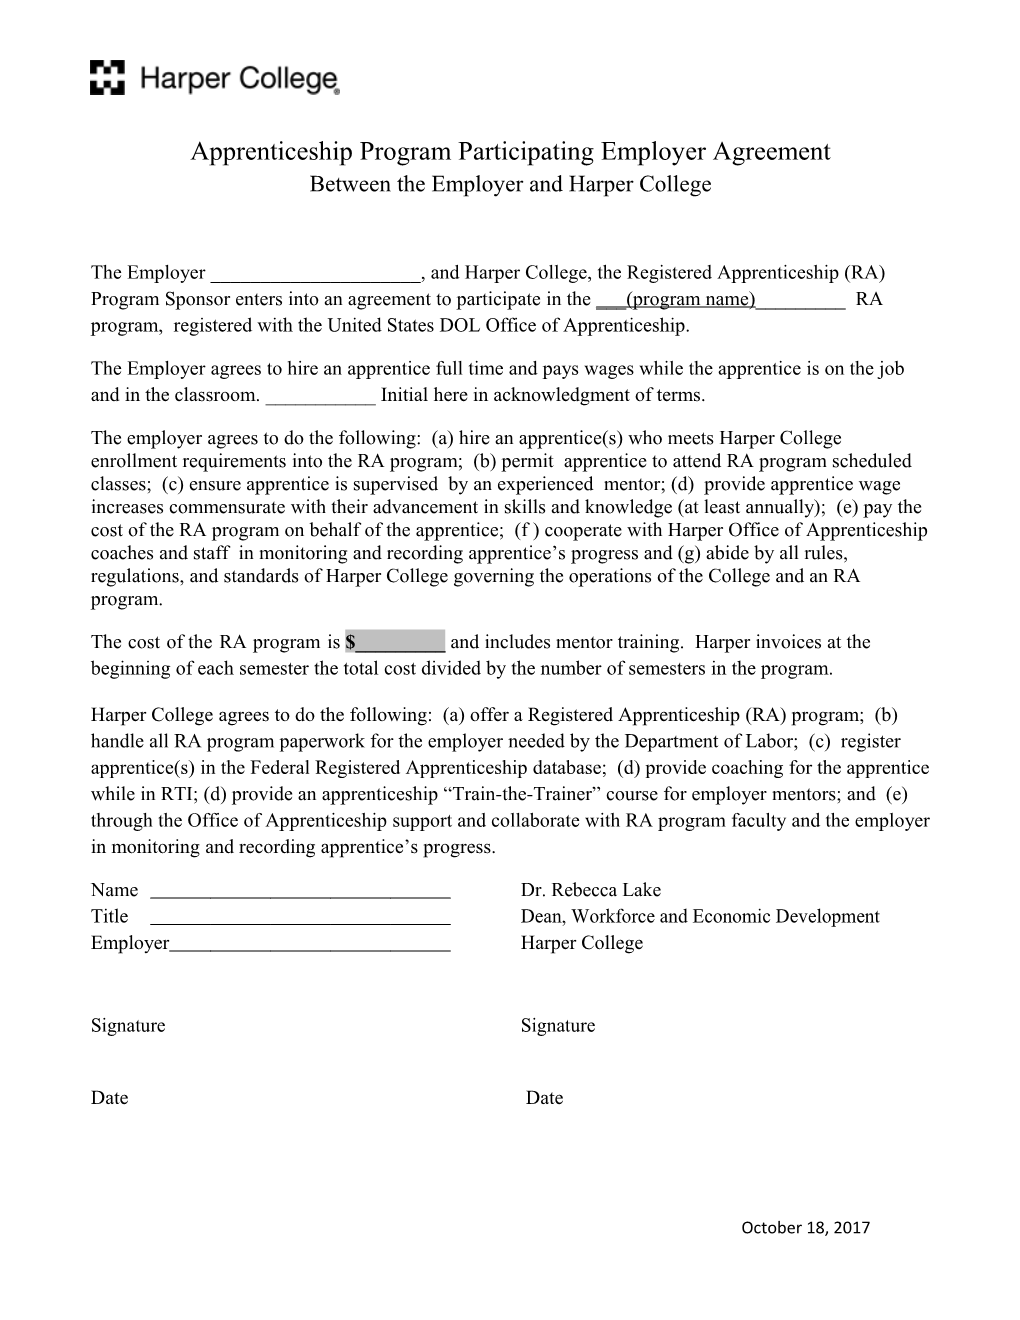 Apprenticeship Program Participating Employer Agreement Between the Employer and Harper College